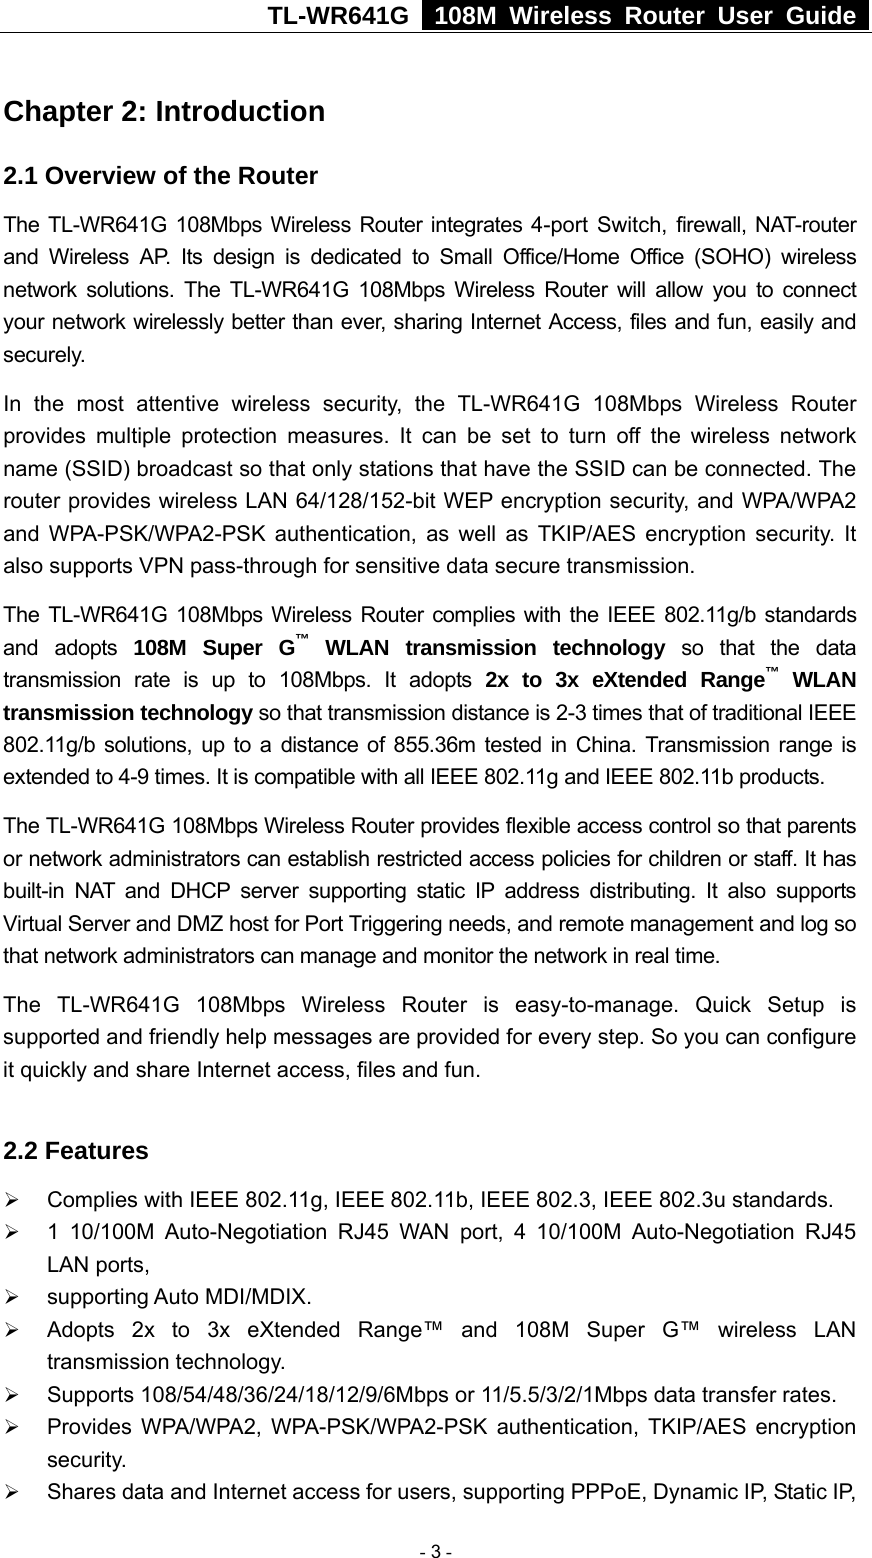 TL-WR641G   108M Wireless Router User Guide  Chapter 2: Introduction 2.1 Overview of the Router The TL-WR641G 108Mbps Wireless Router integrates 4-port Switch, firewall, NAT-router and Wireless AP. Its design is dedicated to Small Office/Home Office (SOHO) wireless network solutions. The TL-WR641G 108Mbps Wireless Router will allow you to connect your network wirelessly better than ever, sharing Internet Access, files and fun, easily and securely. In the most attentive wireless security, the TL-WR641G 108Mbps Wireless Router provides multiple protection measures. It can be set to turn off the wireless network name (SSID) broadcast so that only stations that have the SSID can be connected. The router provides wireless LAN 64/128/152-bit WEP encryption security, and WPA/WPA2 and WPA-PSK/WPA2-PSK authentication, as well as TKIP/AES encryption security. It also supports VPN pass-through for sensitive data secure transmission. The TL-WR641G 108Mbps Wireless Router complies with the IEEE 802.11g/b standards and adopts 108M Super G™ WLAN transmission technology so that the data transmission rate is up to 108Mbps. It adopts 2x to 3x eXtended Range™ WLAN transmission technology so that transmission distance is 2-3 times that of traditional IEEE 802.11g/b solutions, up to a distance of 855.36m tested in China. Transmission range is extended to 4-9 times. It is compatible with all IEEE 802.11g and IEEE 802.11b products. The TL-WR641G 108Mbps Wireless Router provides flexible access control so that parents or network administrators can establish restricted access policies for children or staff. It has built-in NAT and DHCP server supporting static IP address distributing. It also supports Virtual Server and DMZ host for Port Triggering needs, and remote management and log so that network administrators can manage and monitor the network in real time.   The TL-WR641G 108Mbps Wireless Router is easy-to-manage. Quick Setup is supported and friendly help messages are provided for every step. So you can configure it quickly and share Internet access, files and fun.  2.2 Features ¾ Complies with IEEE 802.11g, IEEE 802.11b, IEEE 802.3, IEEE 802.3u standards. ¾ 1 10/100M Auto-Negotiation RJ45 WAN port, 4 10/100M Auto-Negotiation RJ45 LAN ports, ¾ supporting Auto MDI/MDIX. ¾ Adopts 2x to 3x eXtended Range™ and 108M Super G™ wireless LAN transmission technology. ¾ Supports 108/54/48/36/24/18/12/9/6Mbps or 11/5.5/3/2/1Mbps data transfer rates. ¾ Provides WPA/WPA2, WPA-PSK/WPA2-PSK authentication, TKIP/AES encryption security. ¾ Shares data and Internet access for users, supporting PPPoE, Dynamic IP, Static IP,  - 3 - 